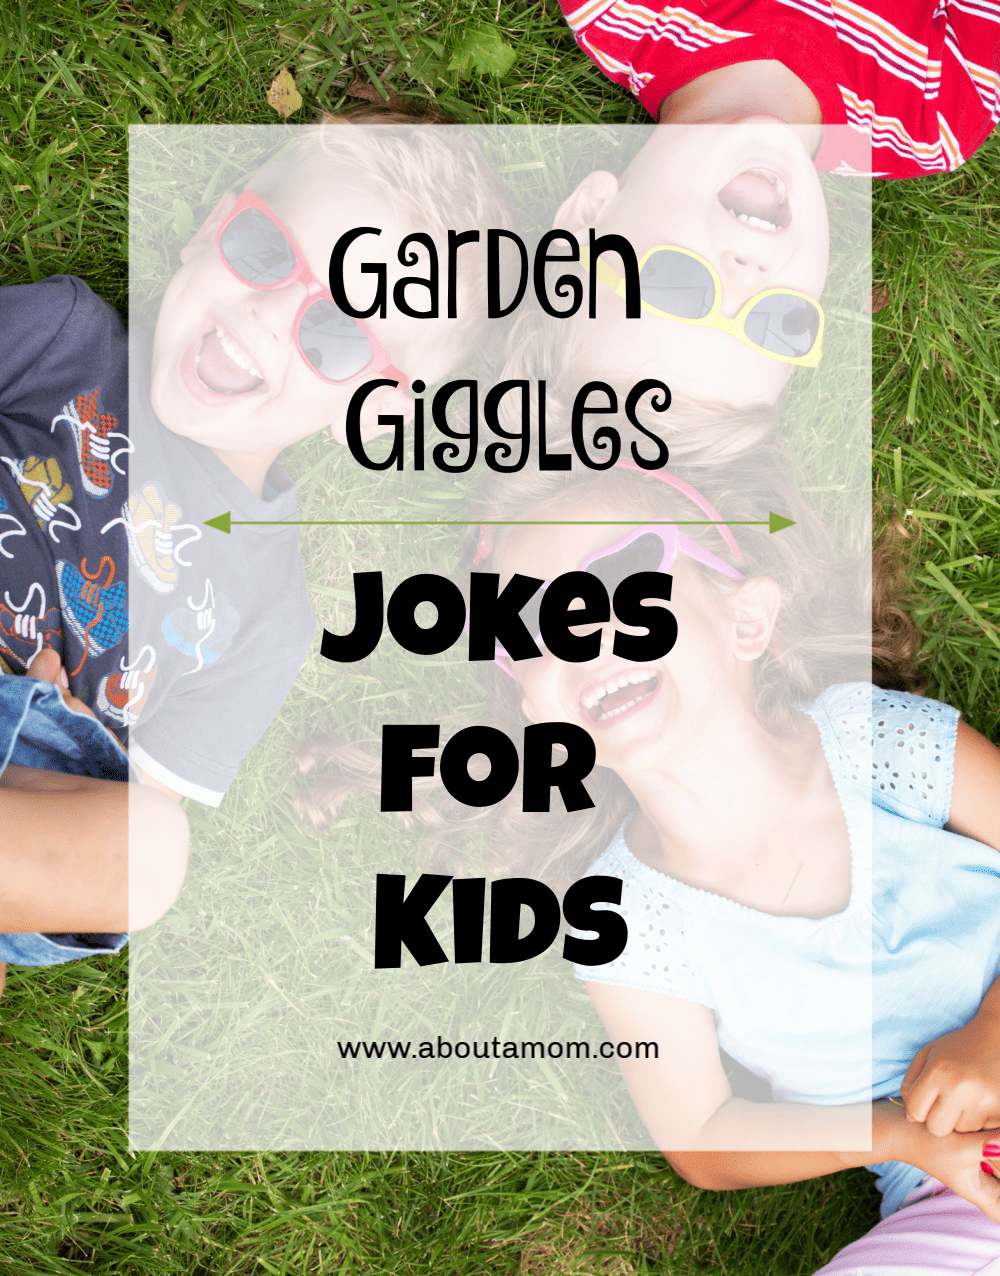 Celebrate spring and the warmer weather with some spring jokes for kids. Enjoy some good belly laughs and make springtime and outdoor activities even more fun for kids with these cute flower jokes, plant jokes and gardening jokes!